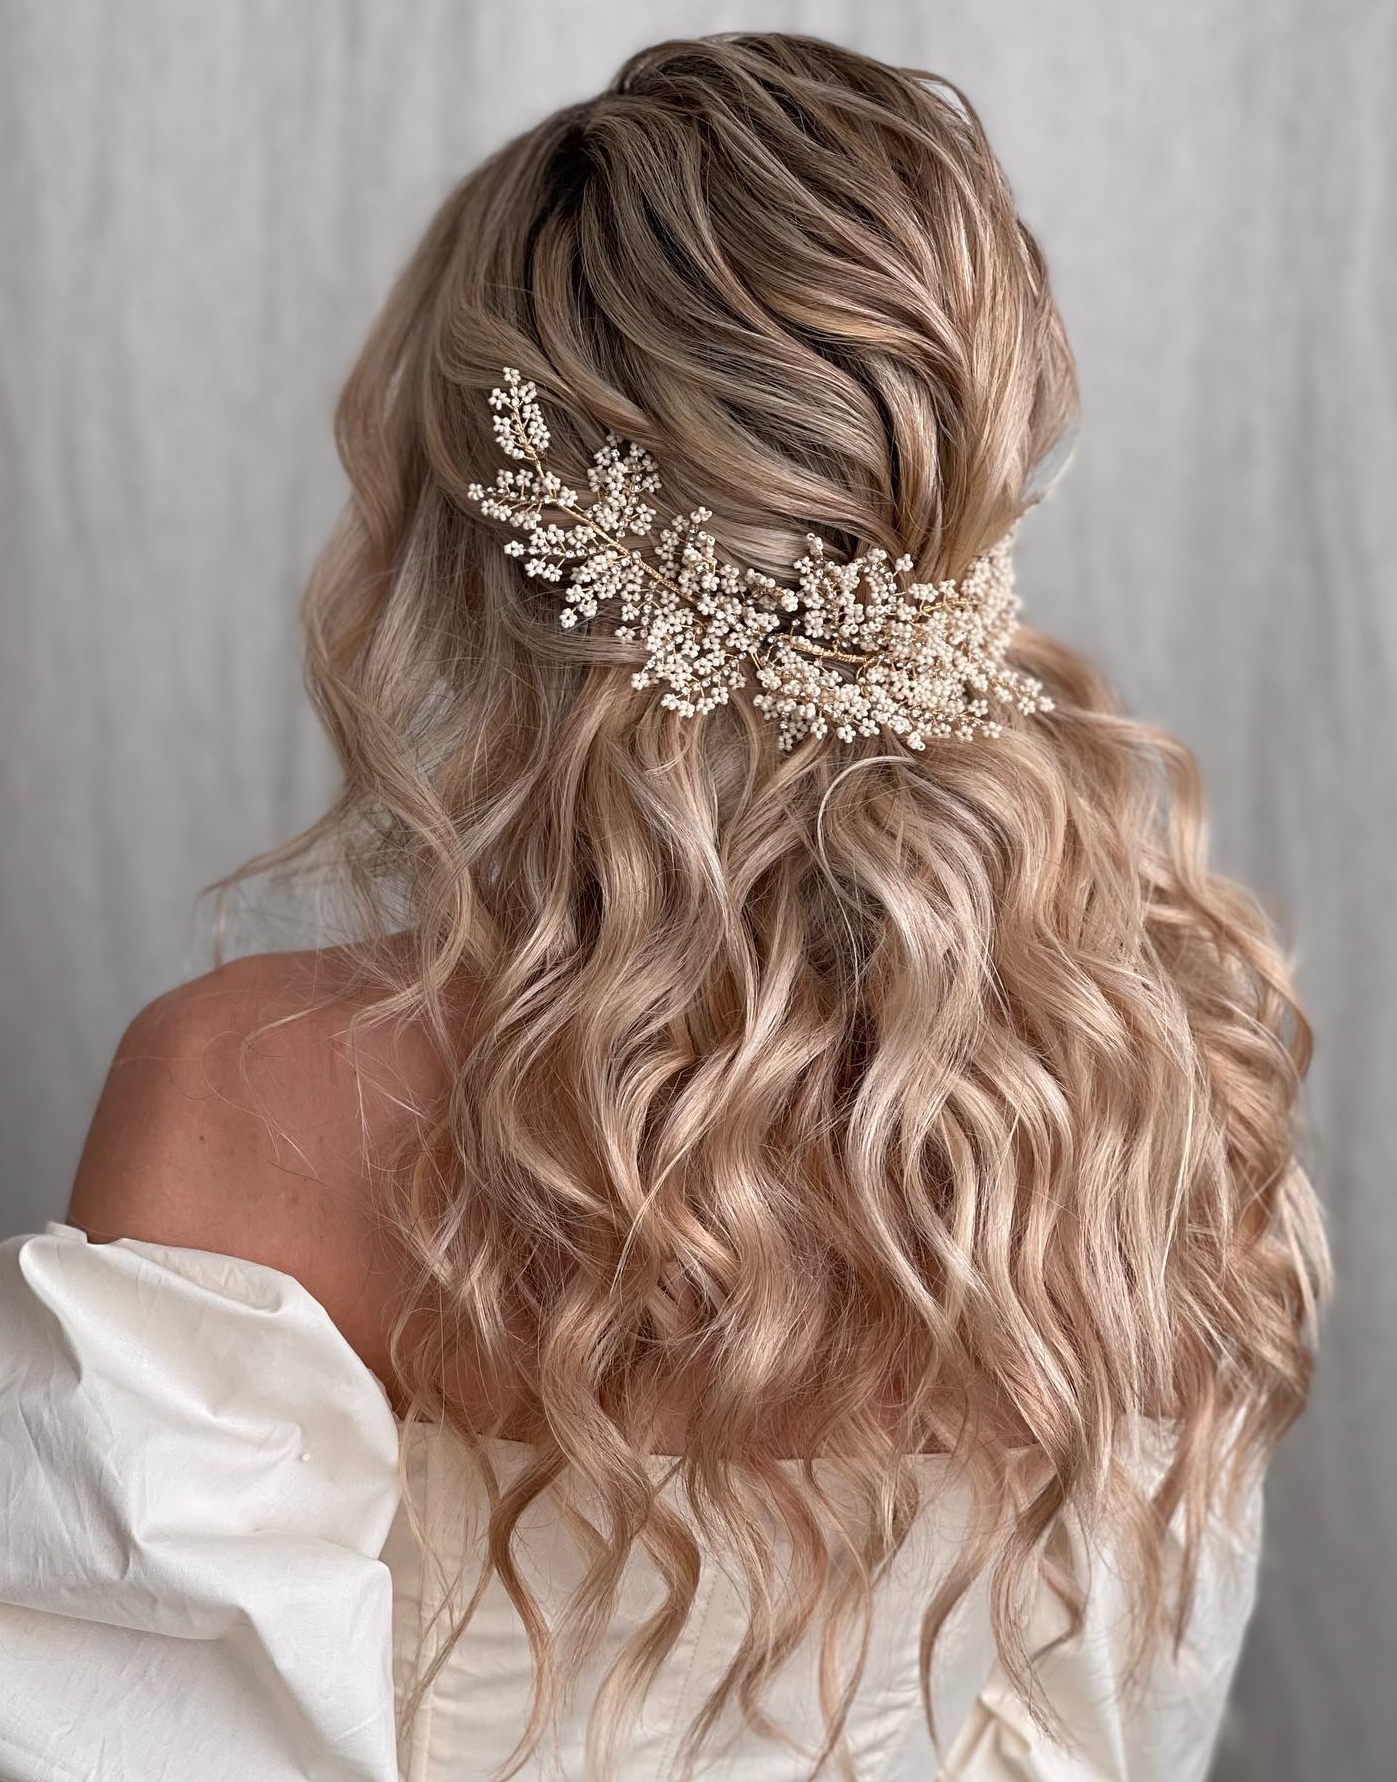 50 Romantic Wedding Hairstyles to Bring the Bride's Image to Perfection -  Hairstylery